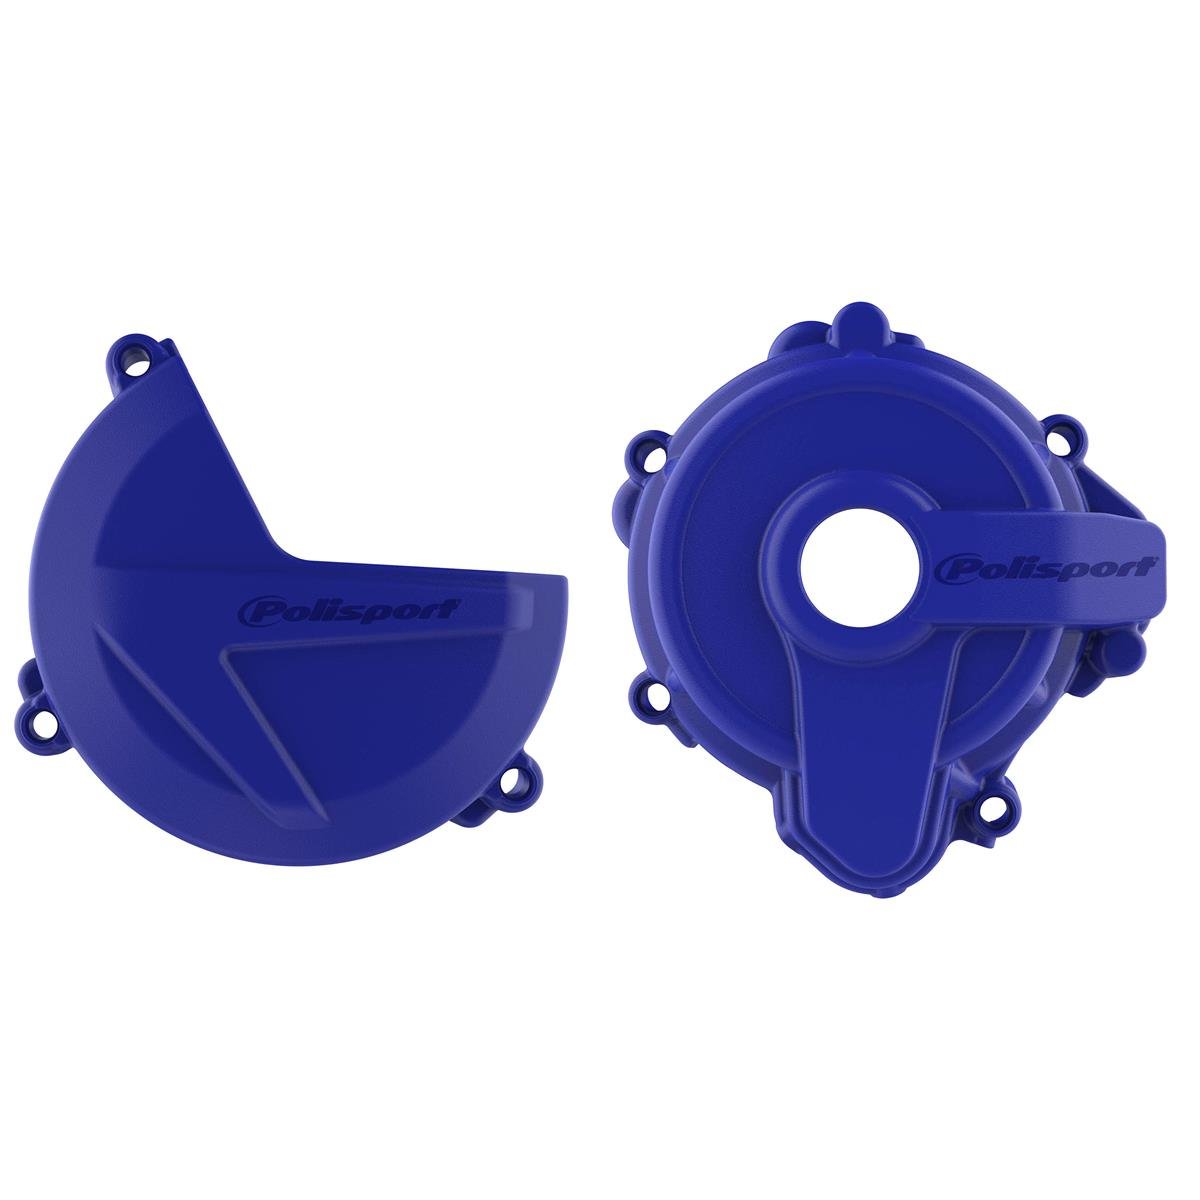 Polisport Clutch/Ignition Cover Protection  Sherco SE 250/300 14-20, Blue